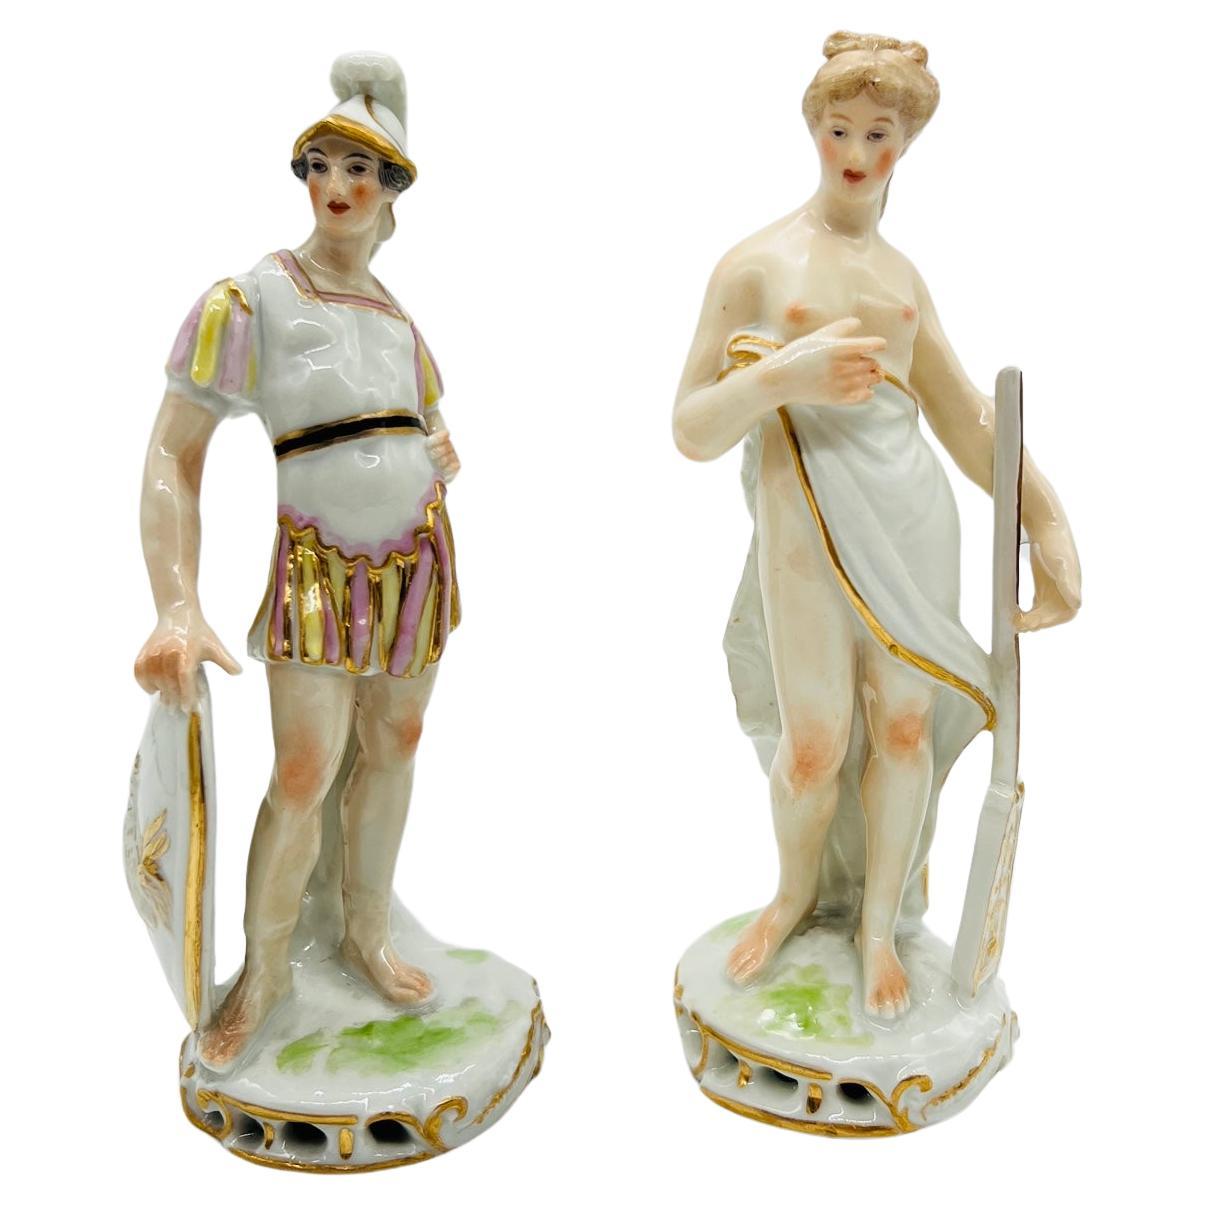 Samson, Edme Et Cie (Founded 1845), 20th century.

A two piece grouping of porcelain figures depicting Mars & Venus. Modeled after the Meissen originals. 

